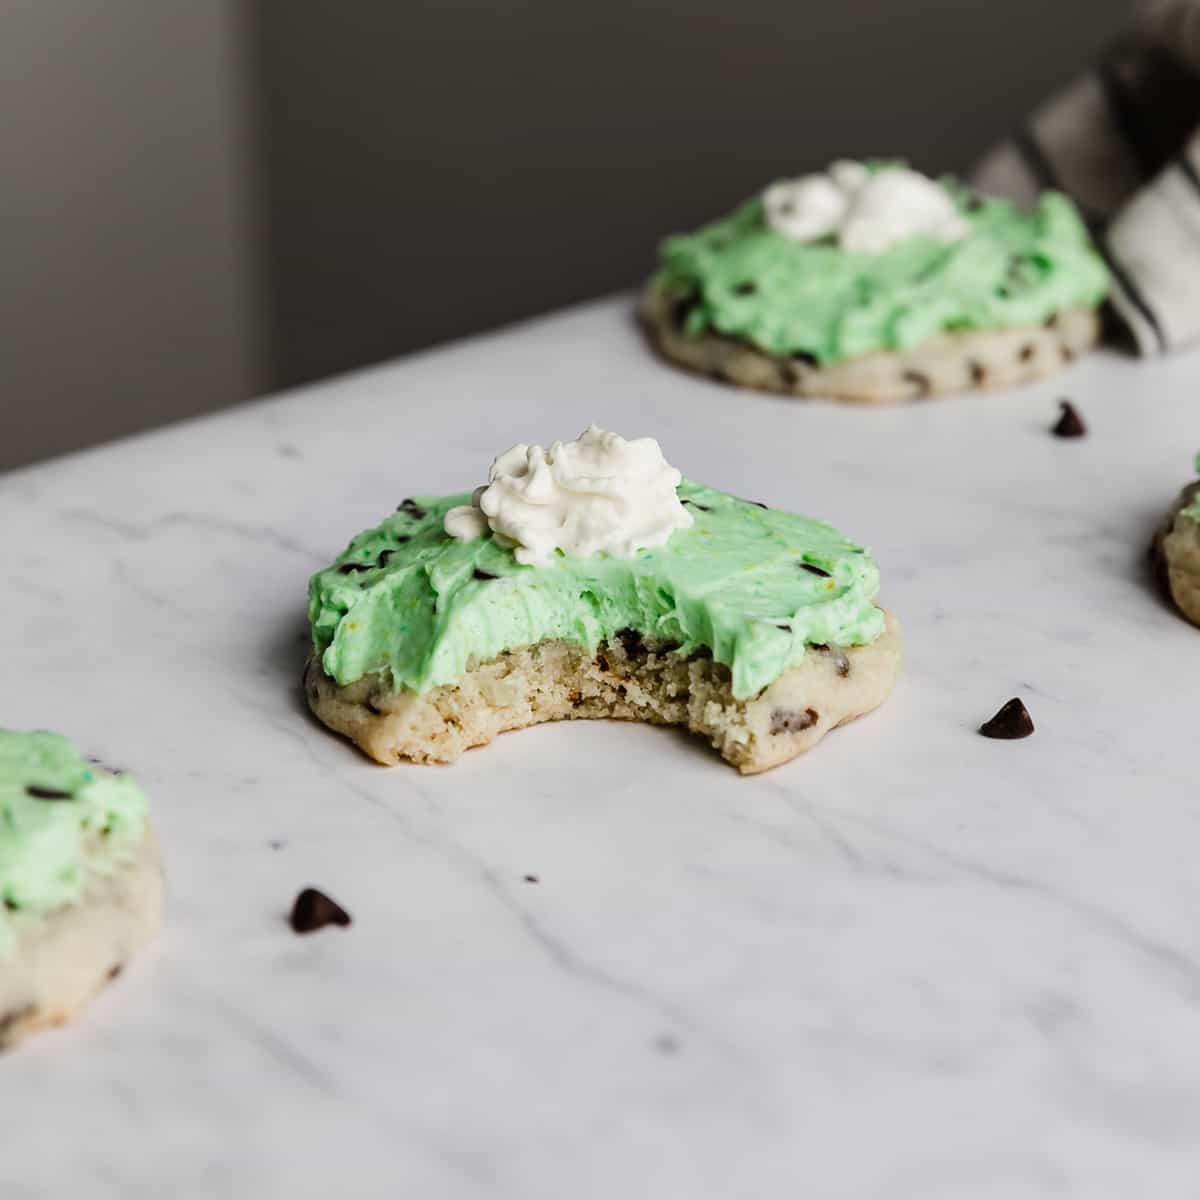 A bite taken out of a copycat Crumbl Mint Chip Ice Cream Cookie that's topped with mint green frosting and a dollop of whip cream.